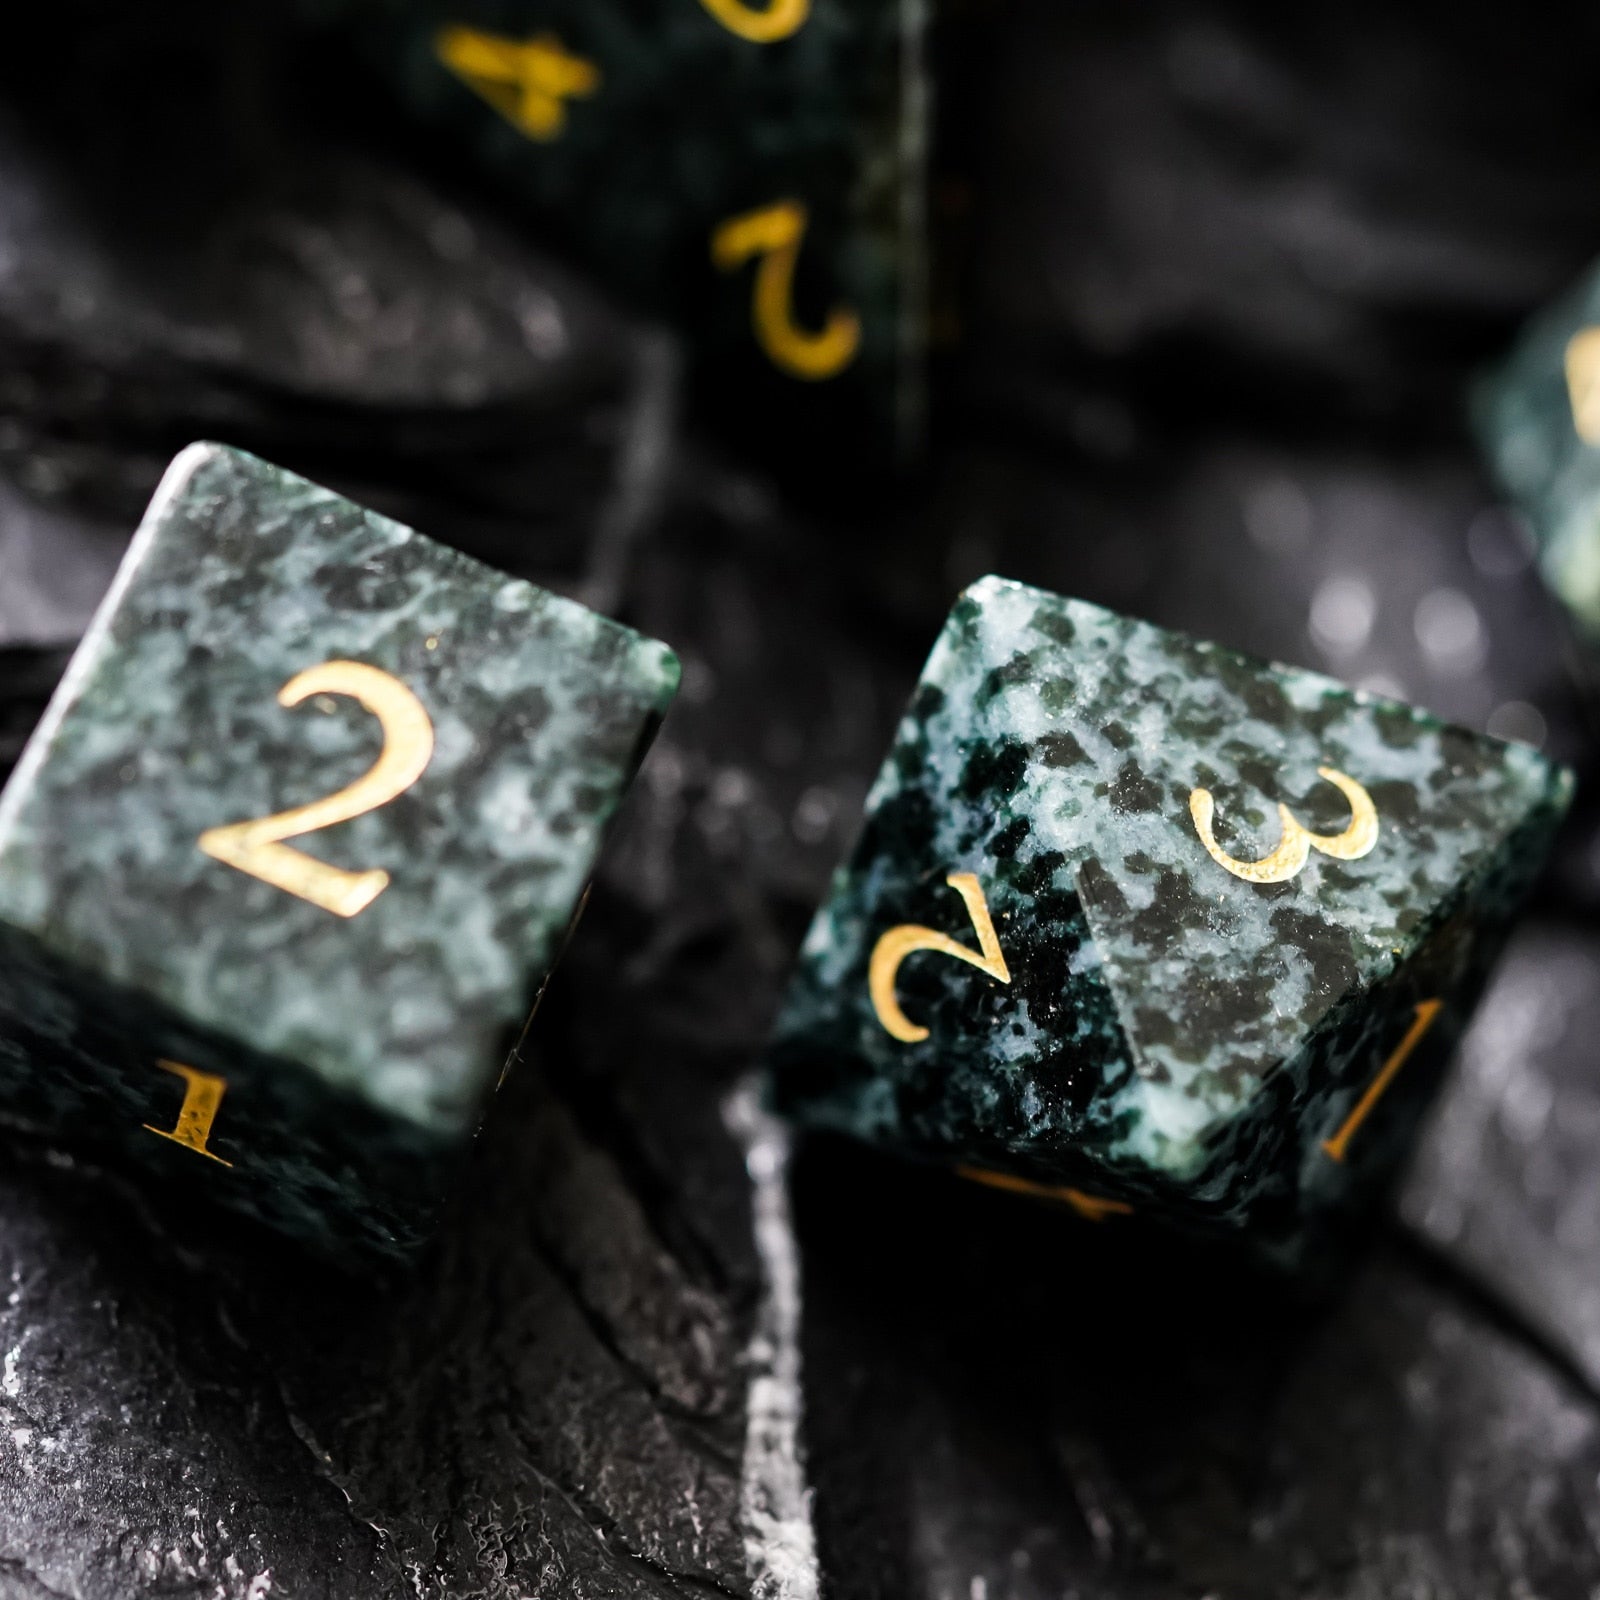 d6 and d8 highlight, stone dice dark coloring